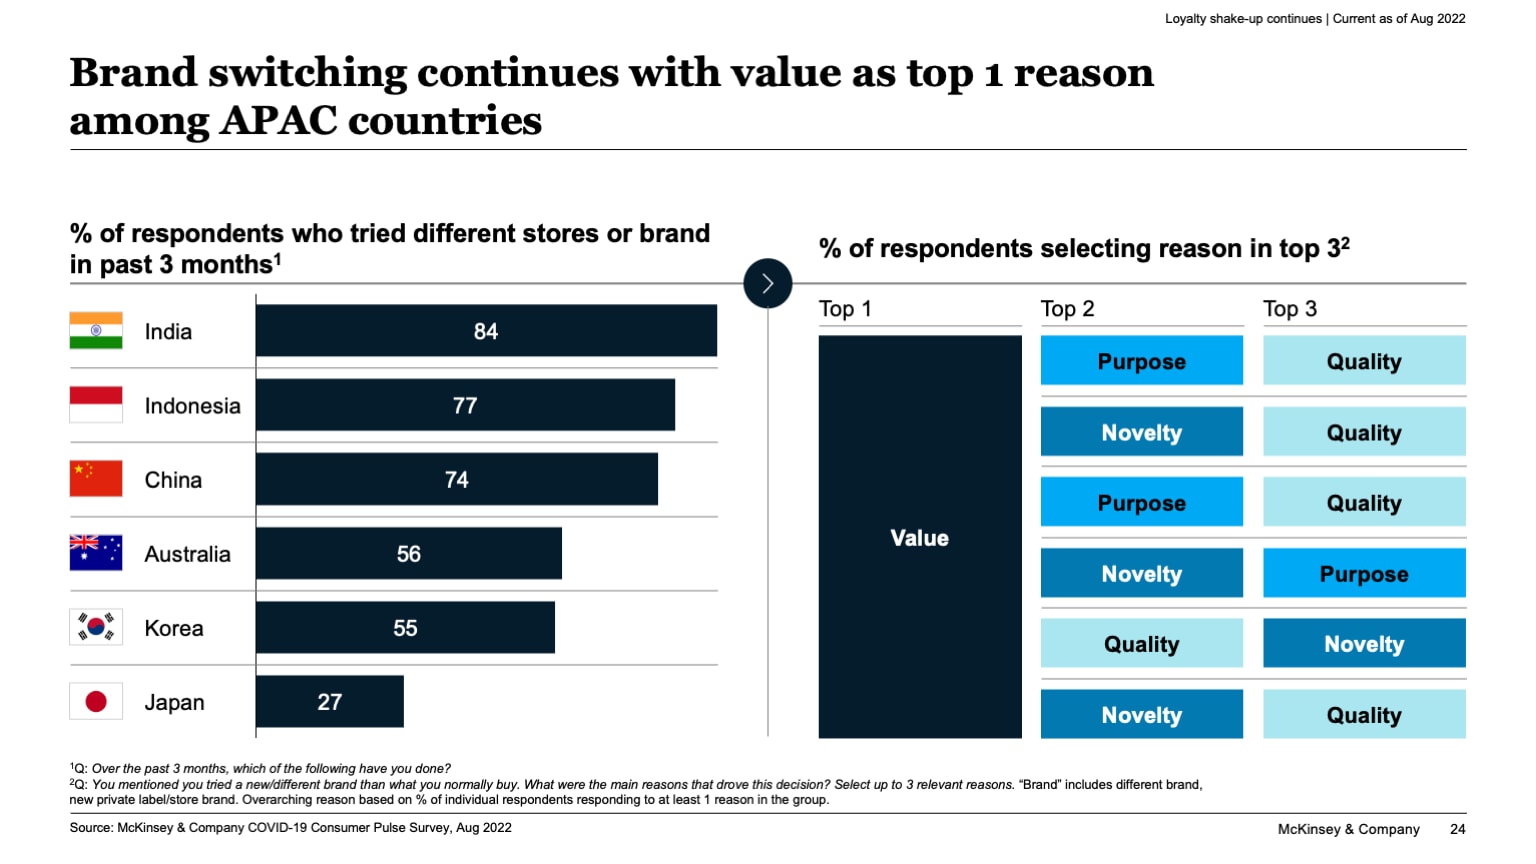 Brand switching continues with value as top 1 reason among APAC countries